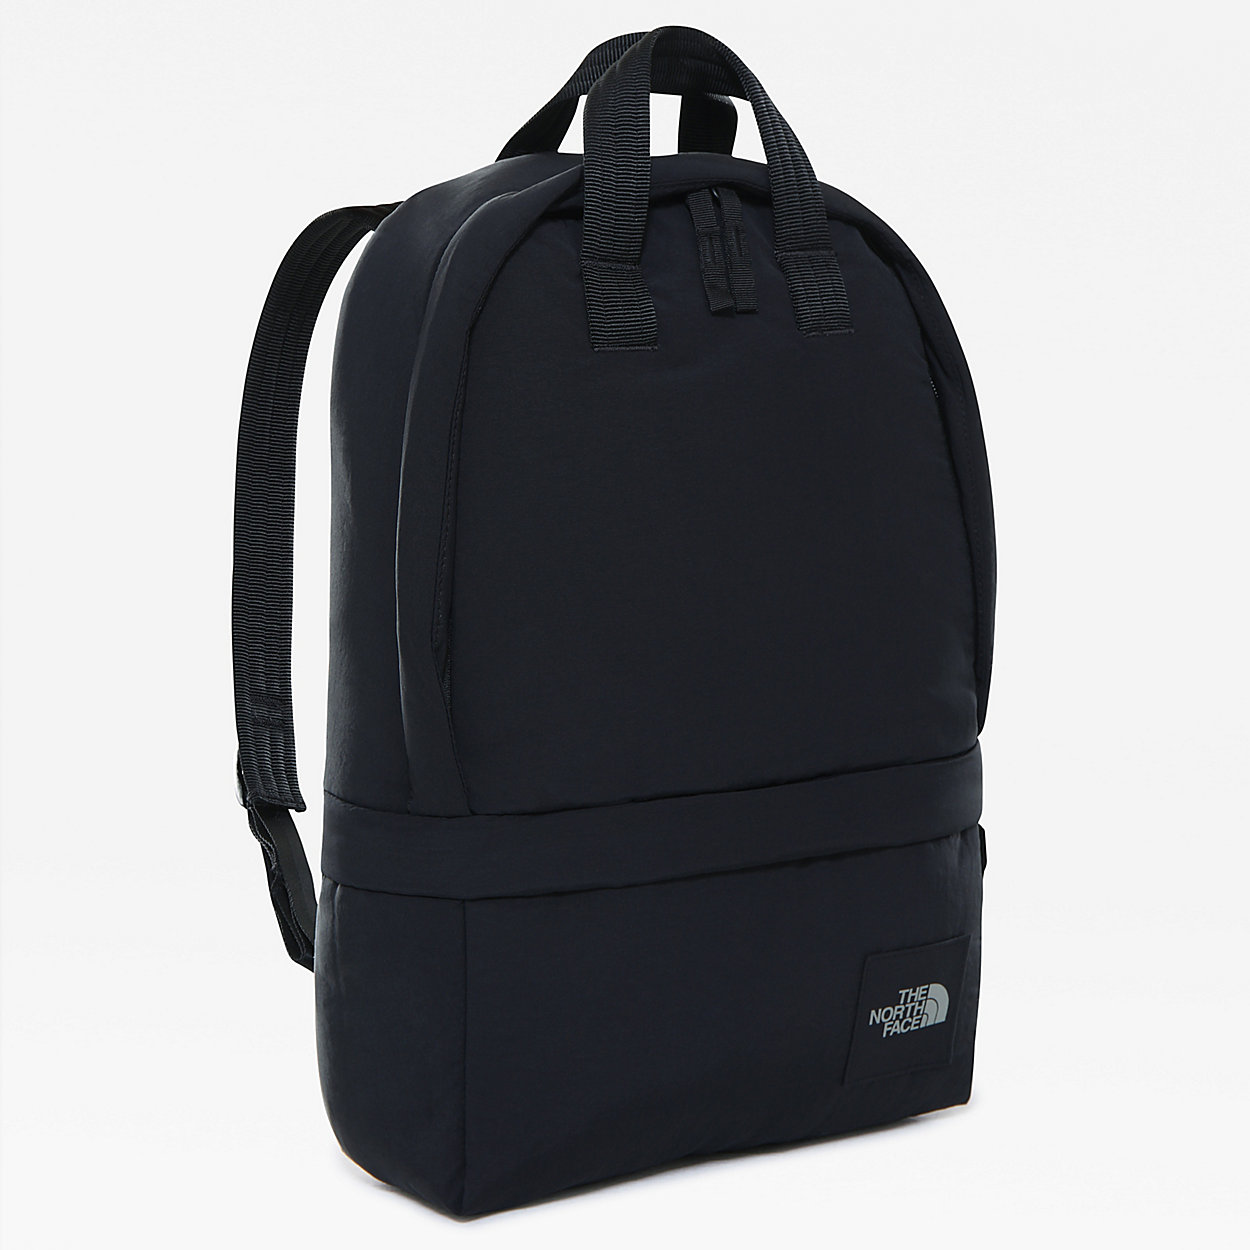 The North Face UNISEX CITY VOYAGER DAYPACK. 1